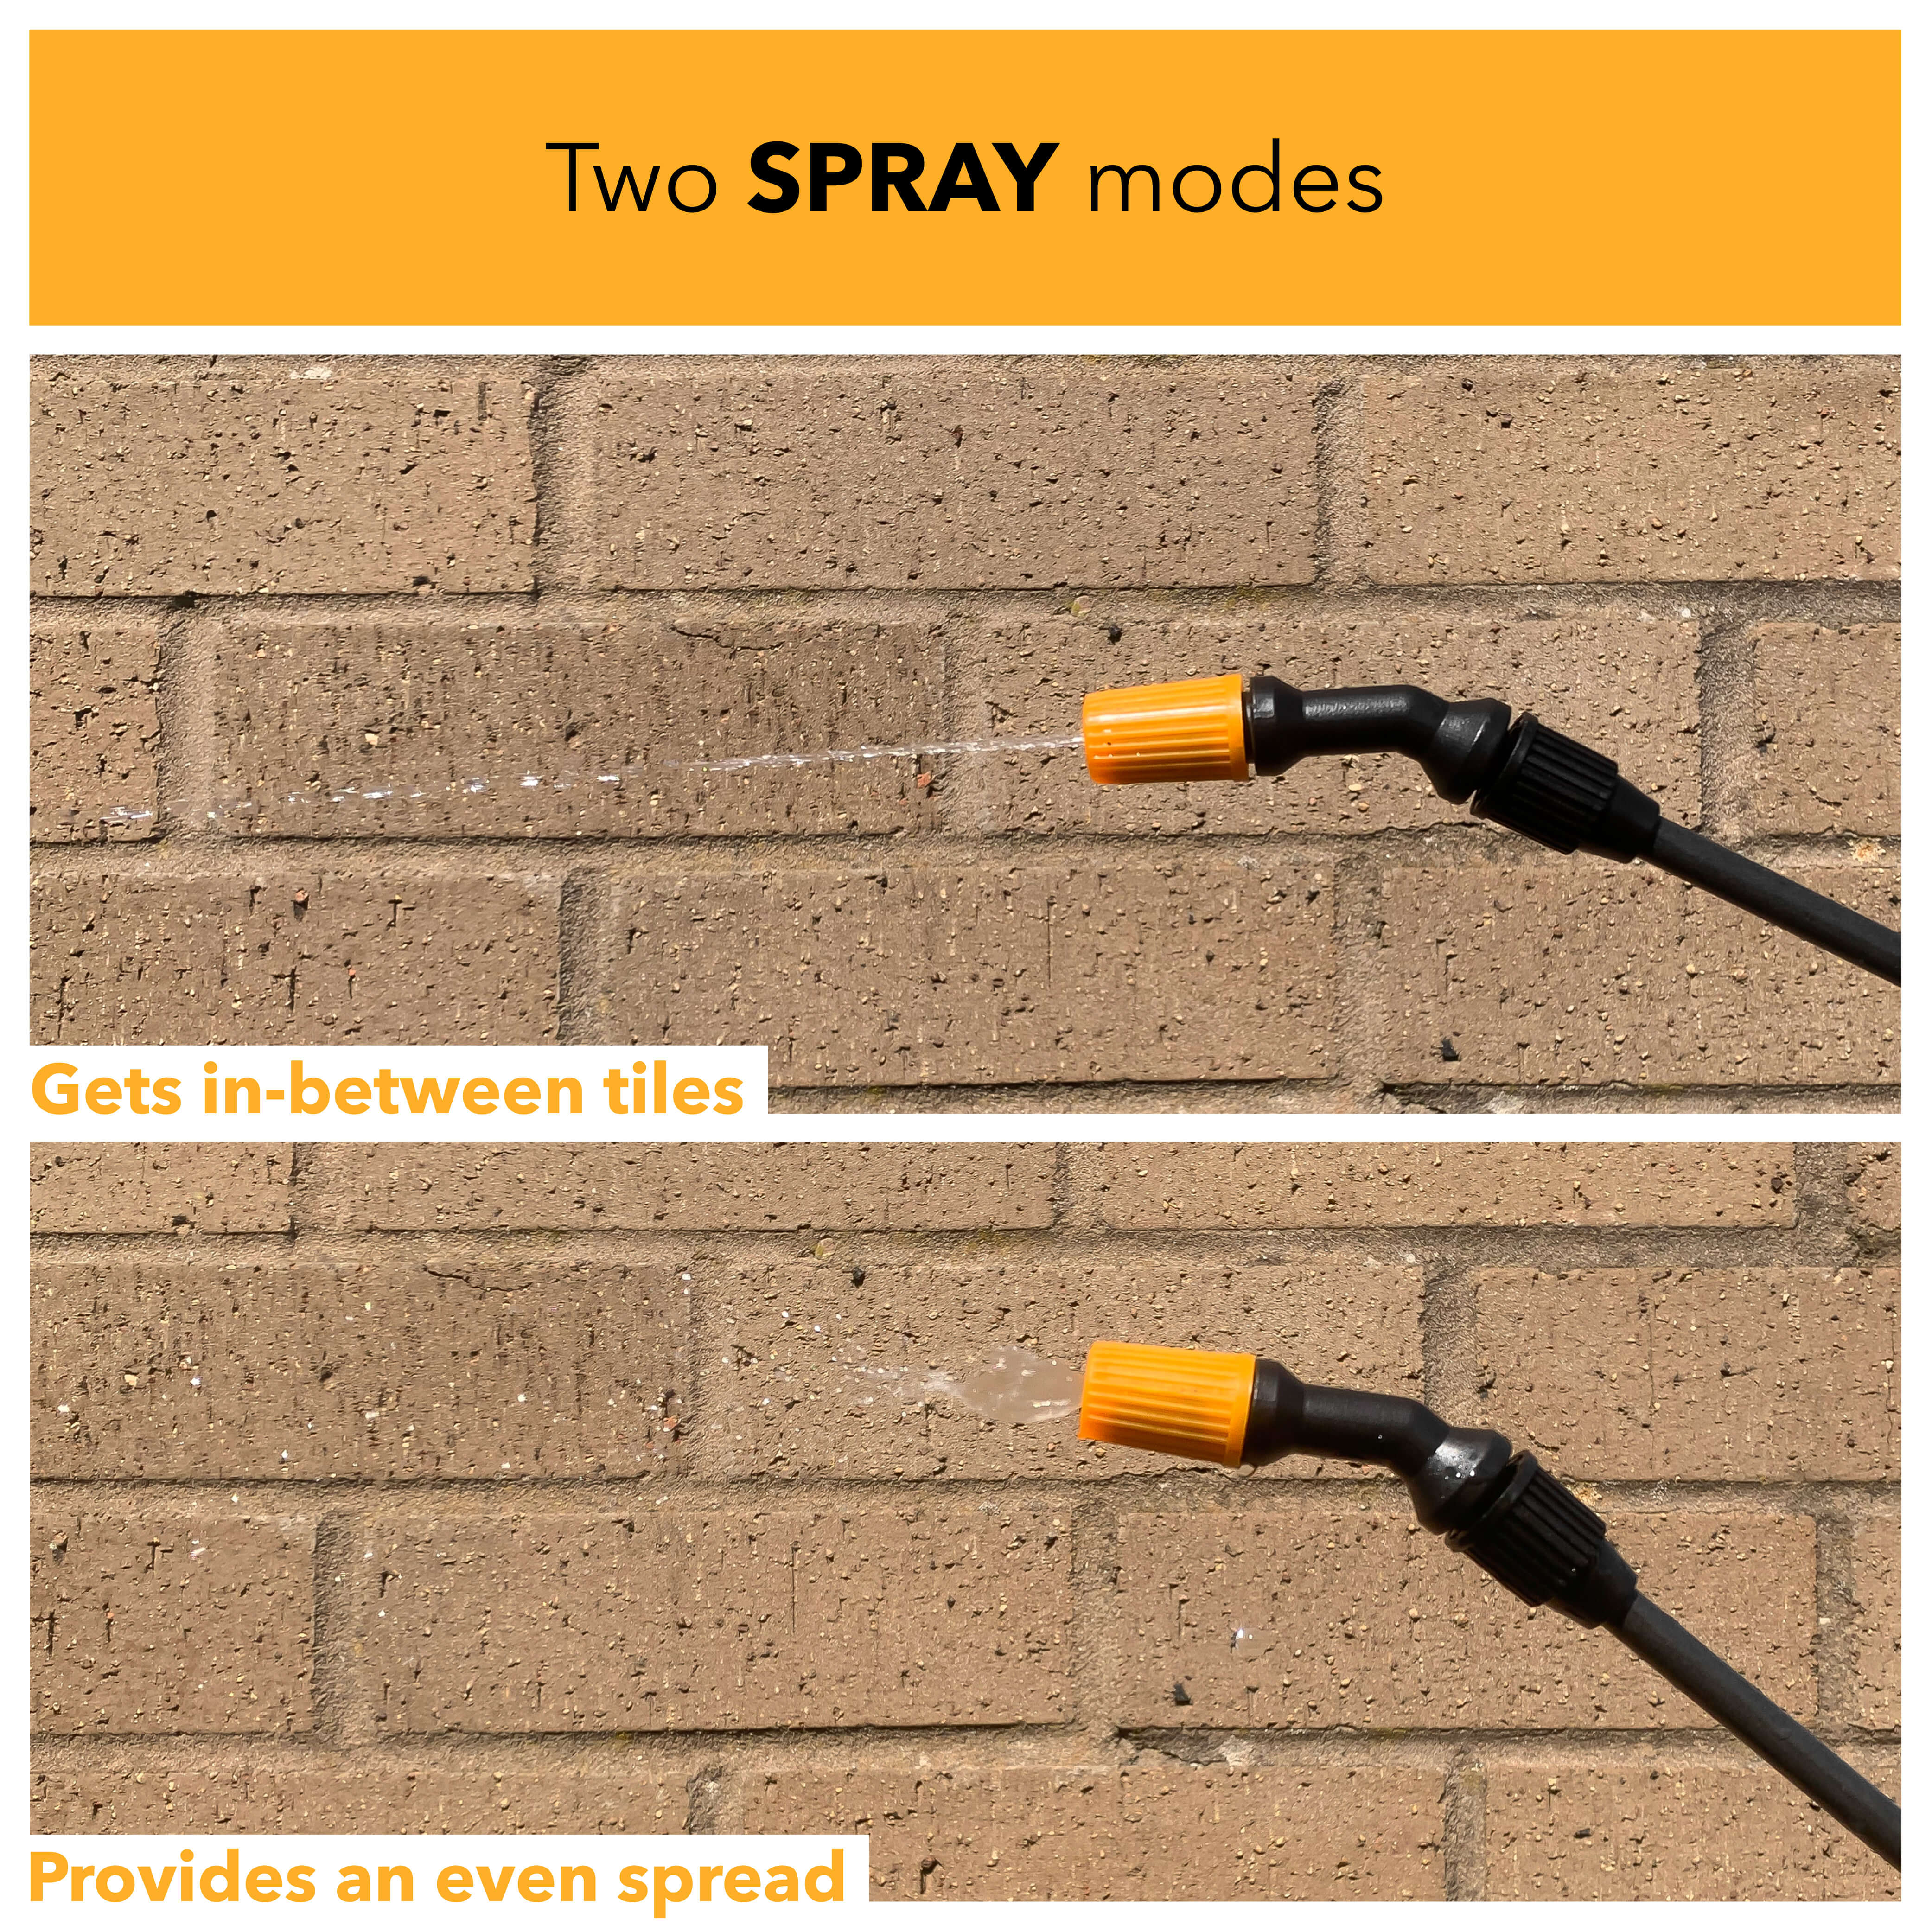 Two spray modes. One gets in-between tiles, and spray provides an even spread